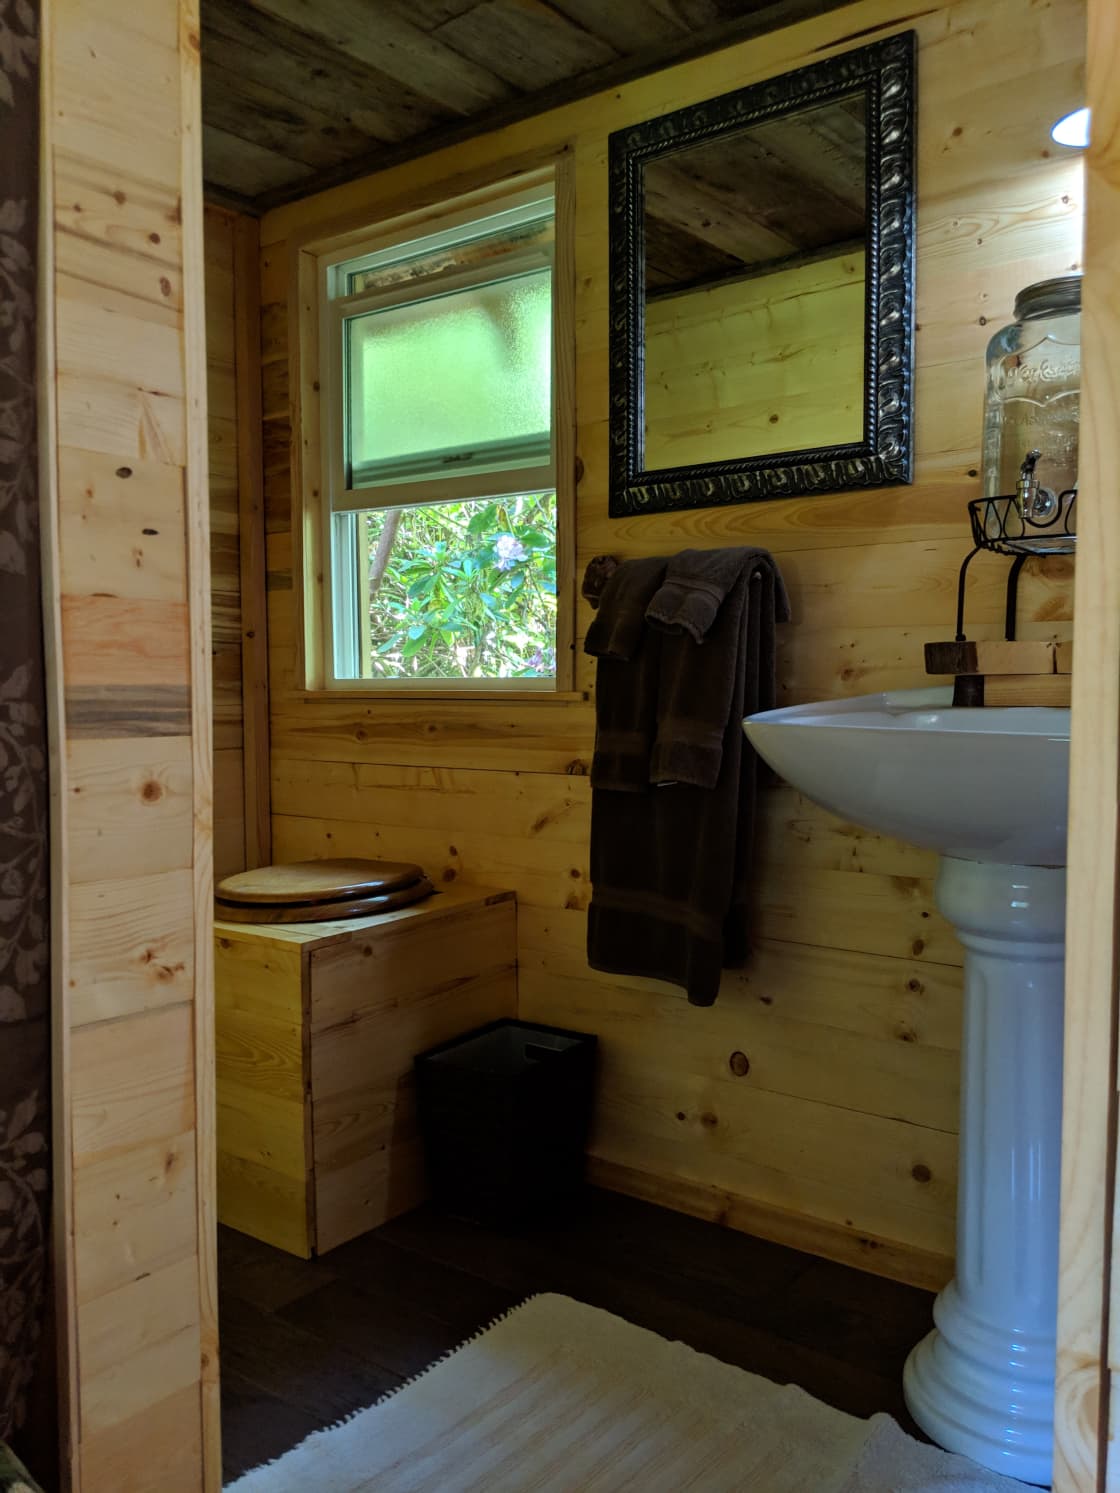 Off grid with compostable wood chips toilet and cistern fed sink with filtered spring water for drinking and washing.